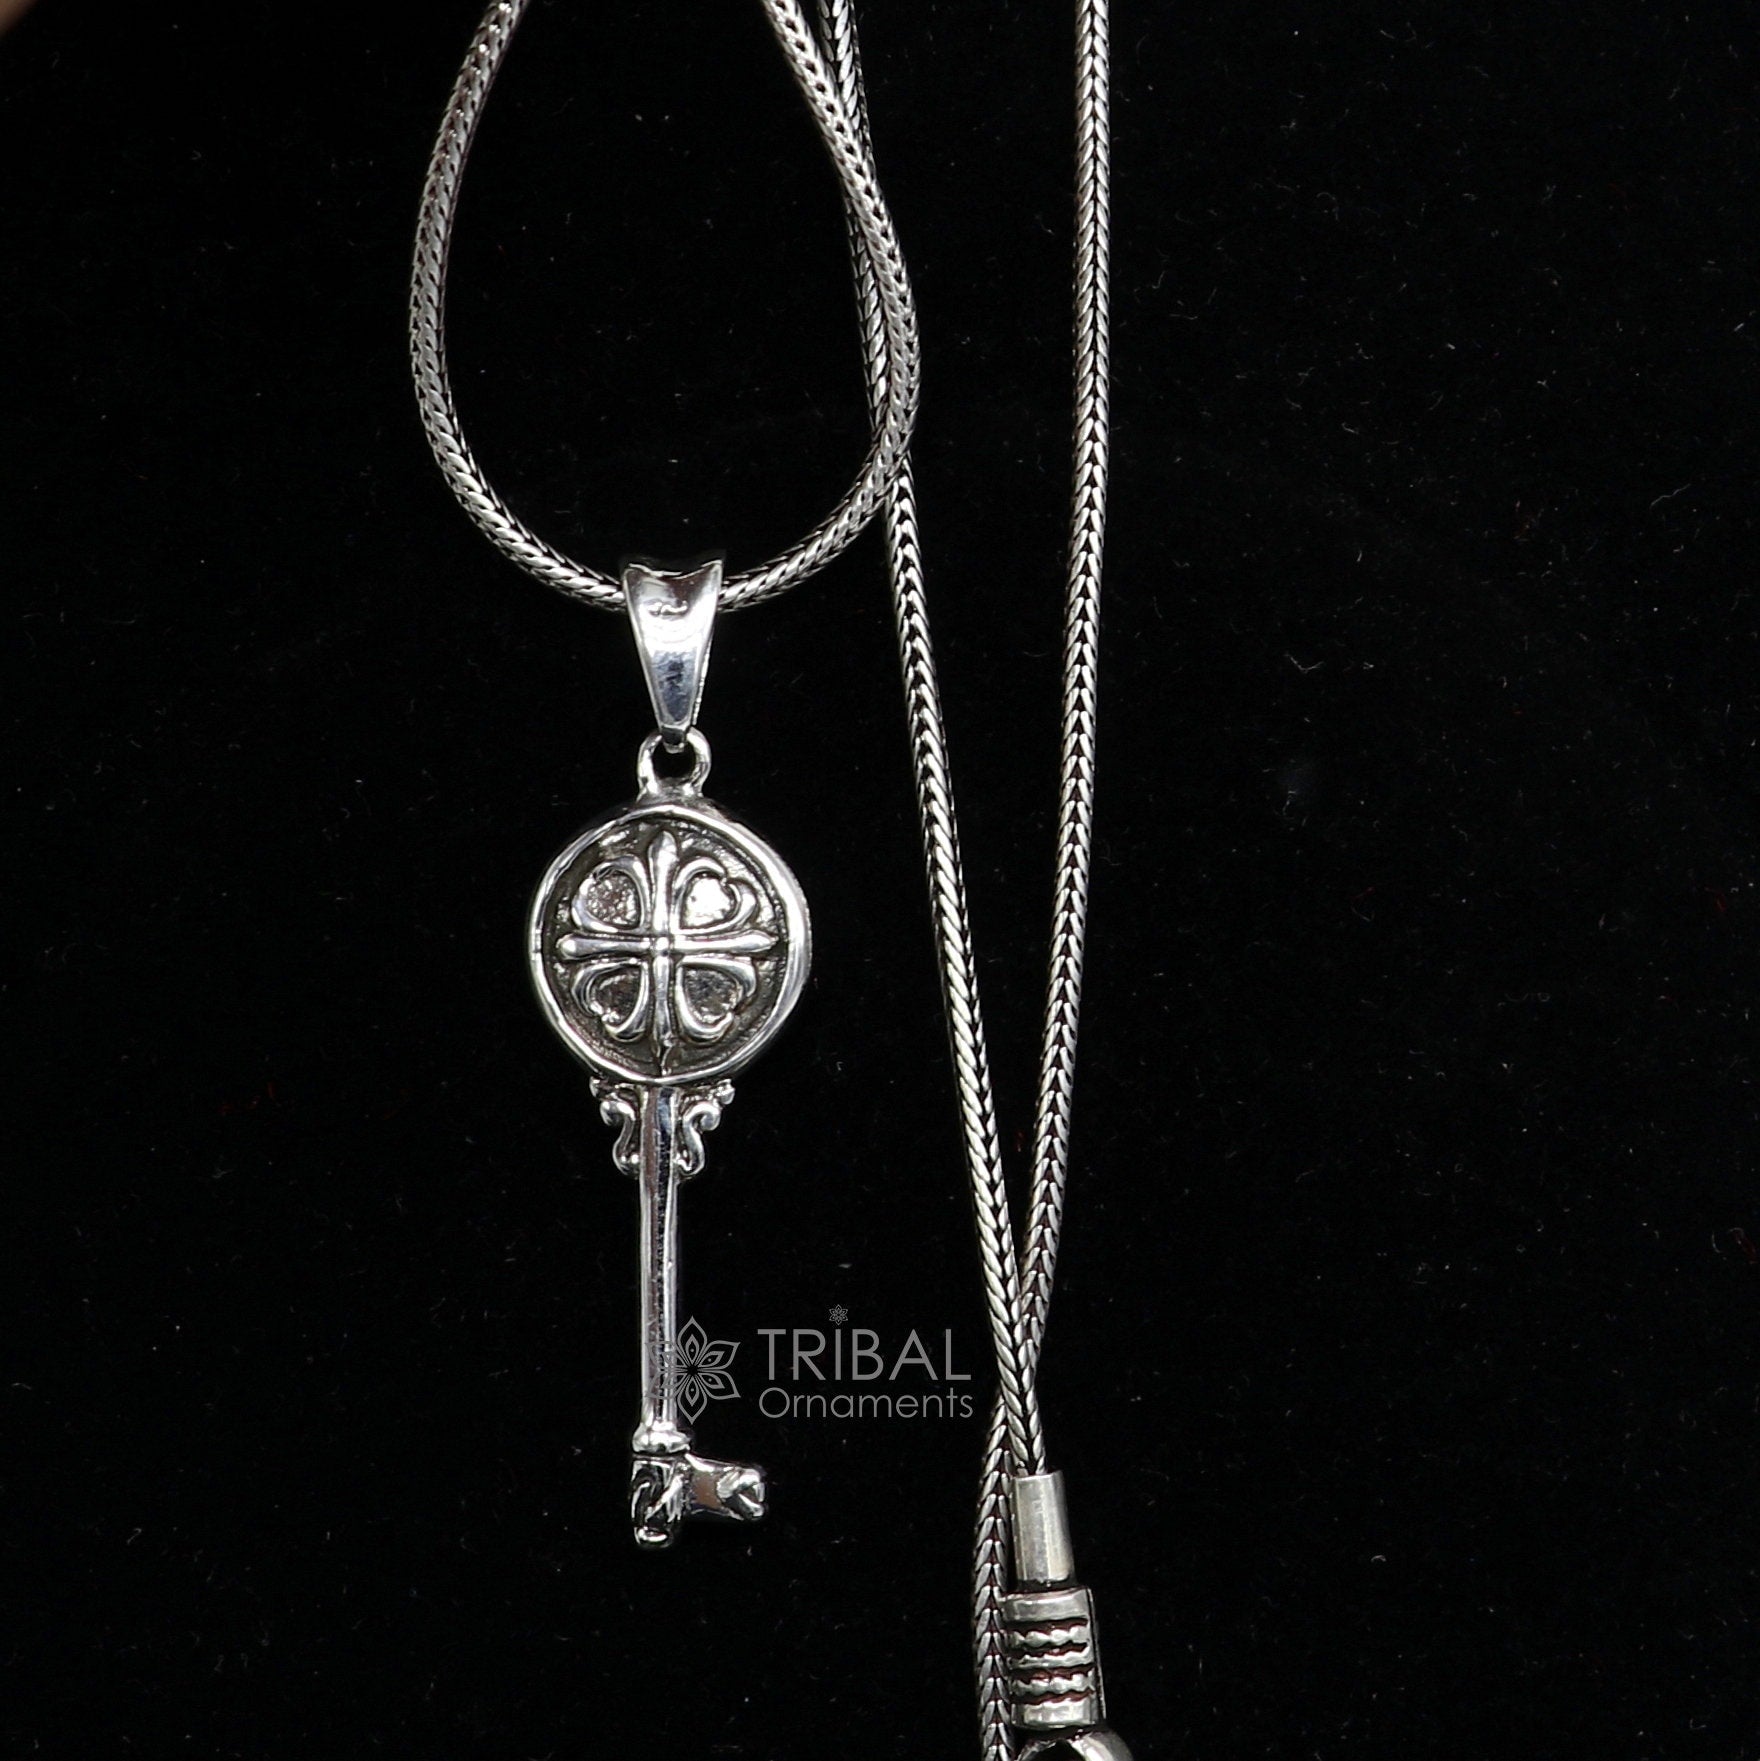 vintage style key pendant necklace 925 sterling silver amazing stylish customized jewelry from india nsp657 - TRIBAL ORNAMENTS